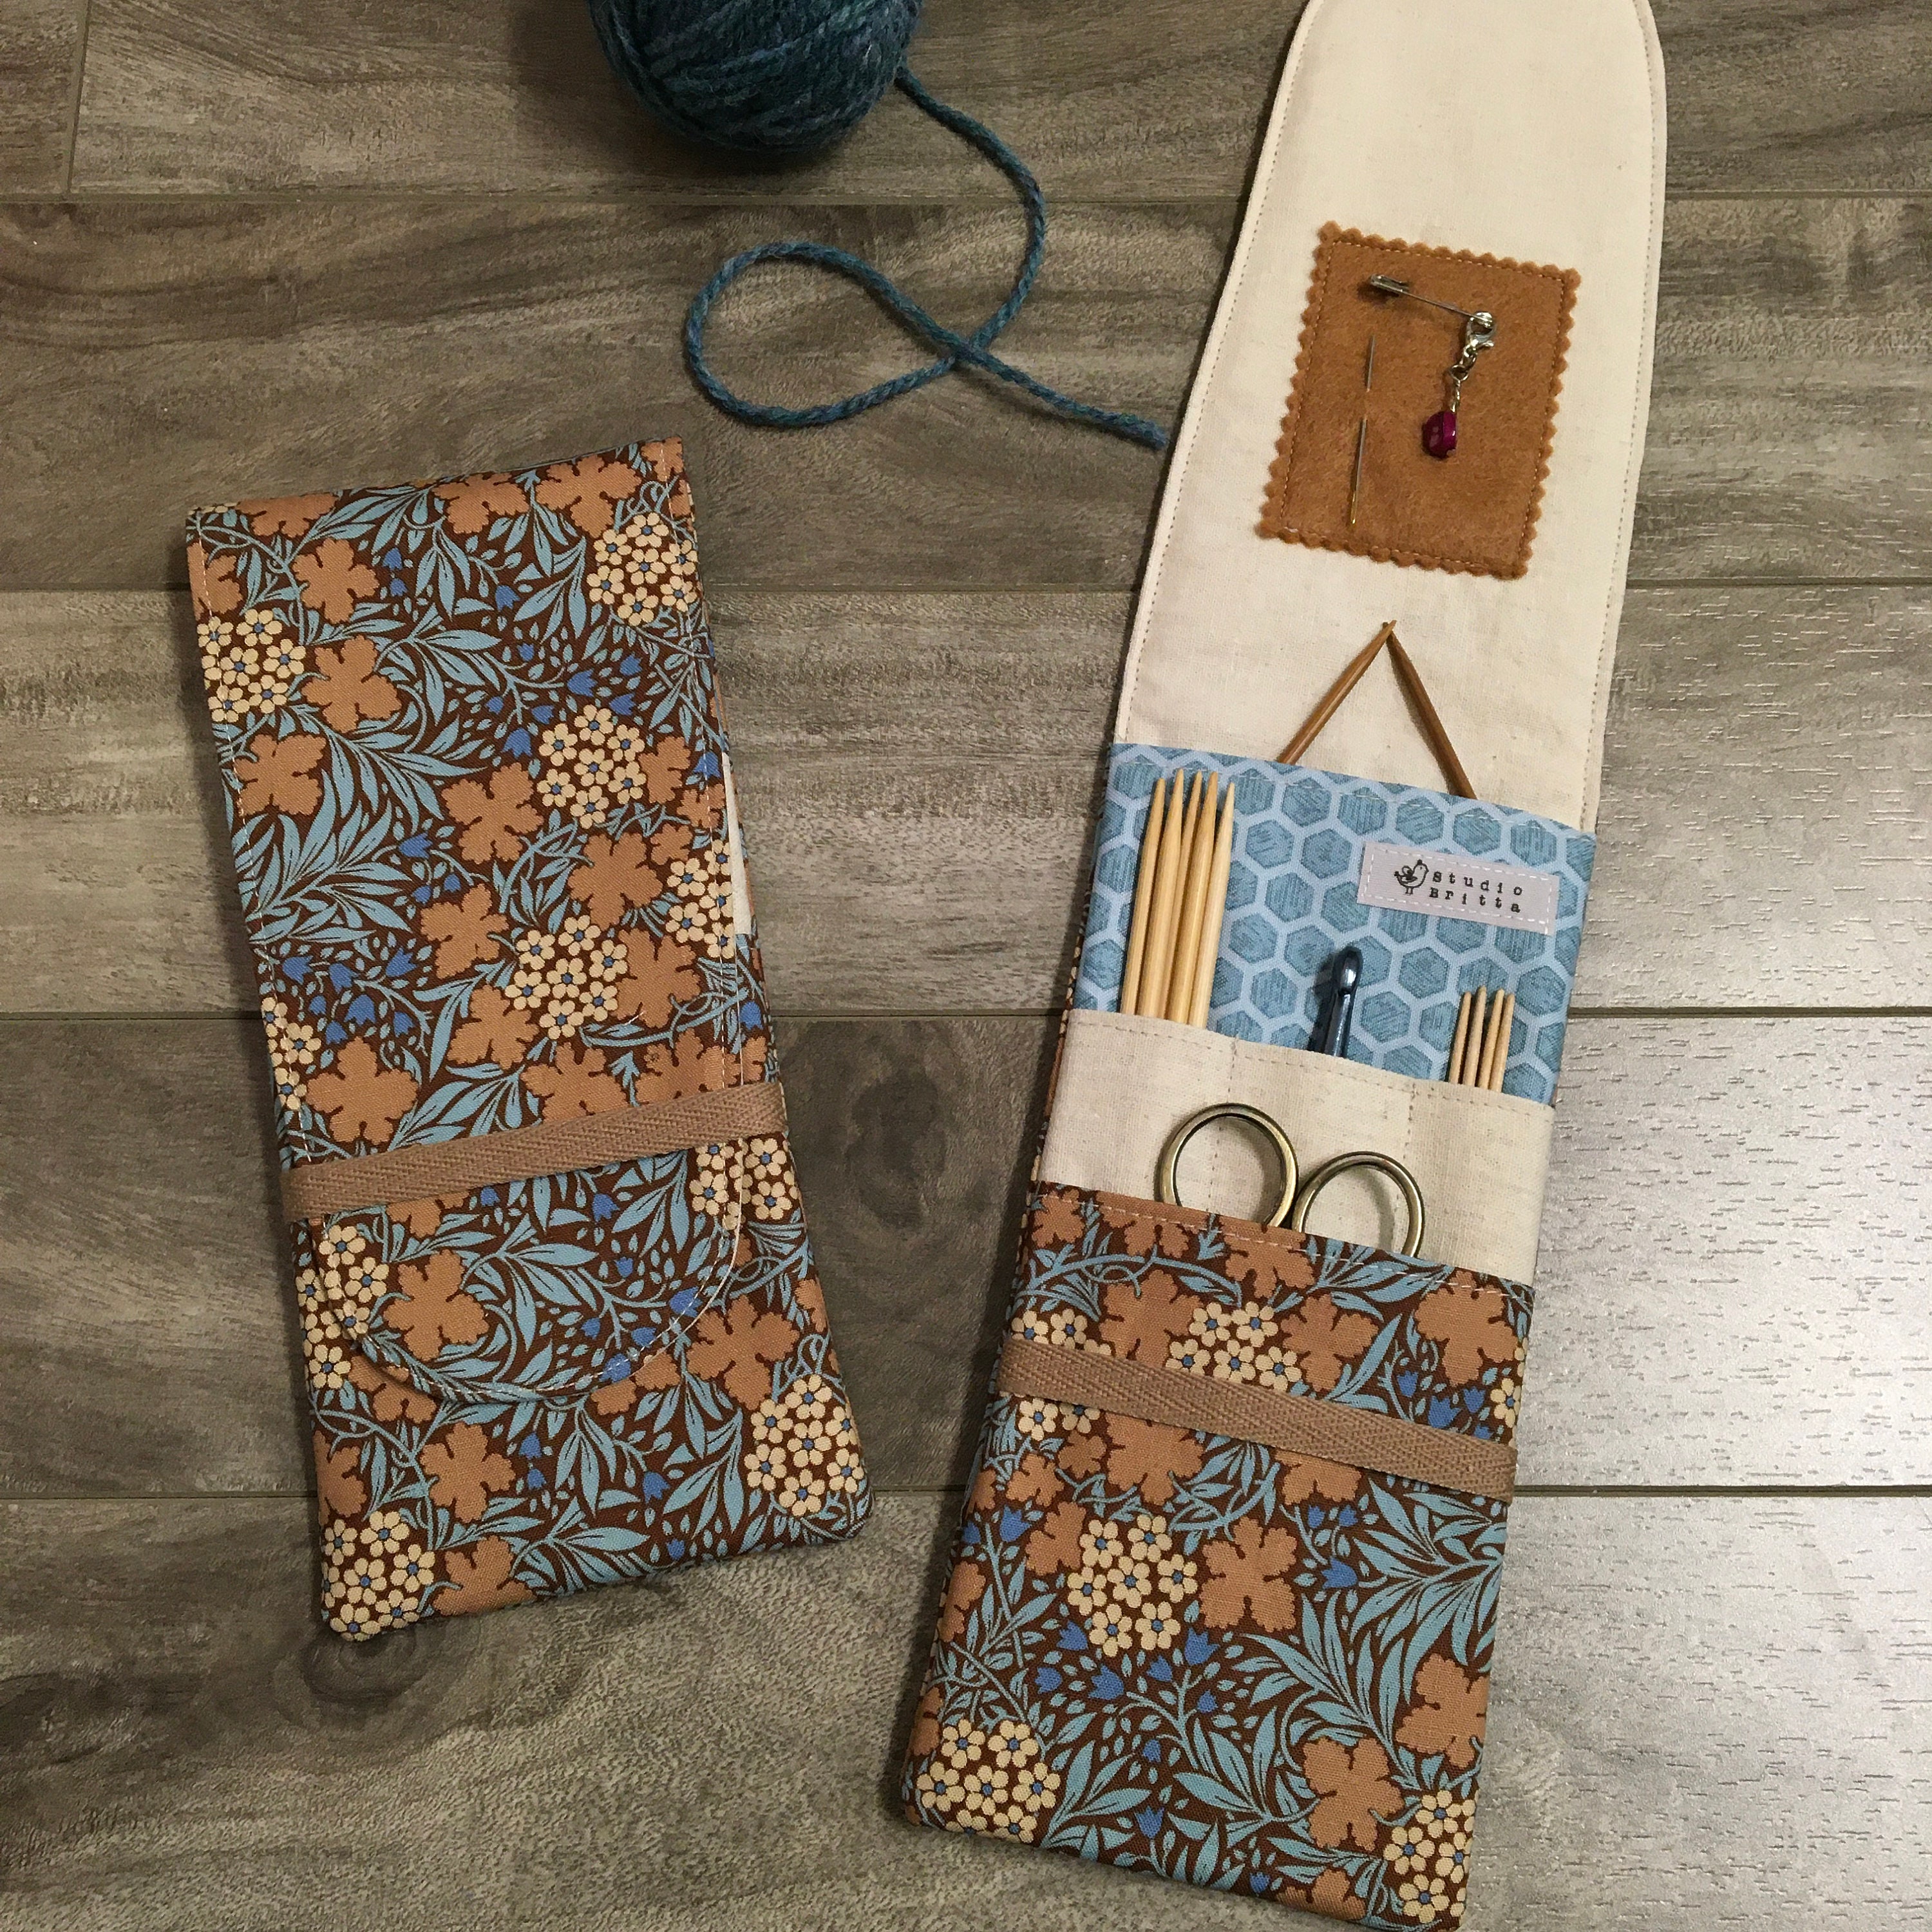 Tinnberry Knitting Needle Case sewing tutorial, part 1. 